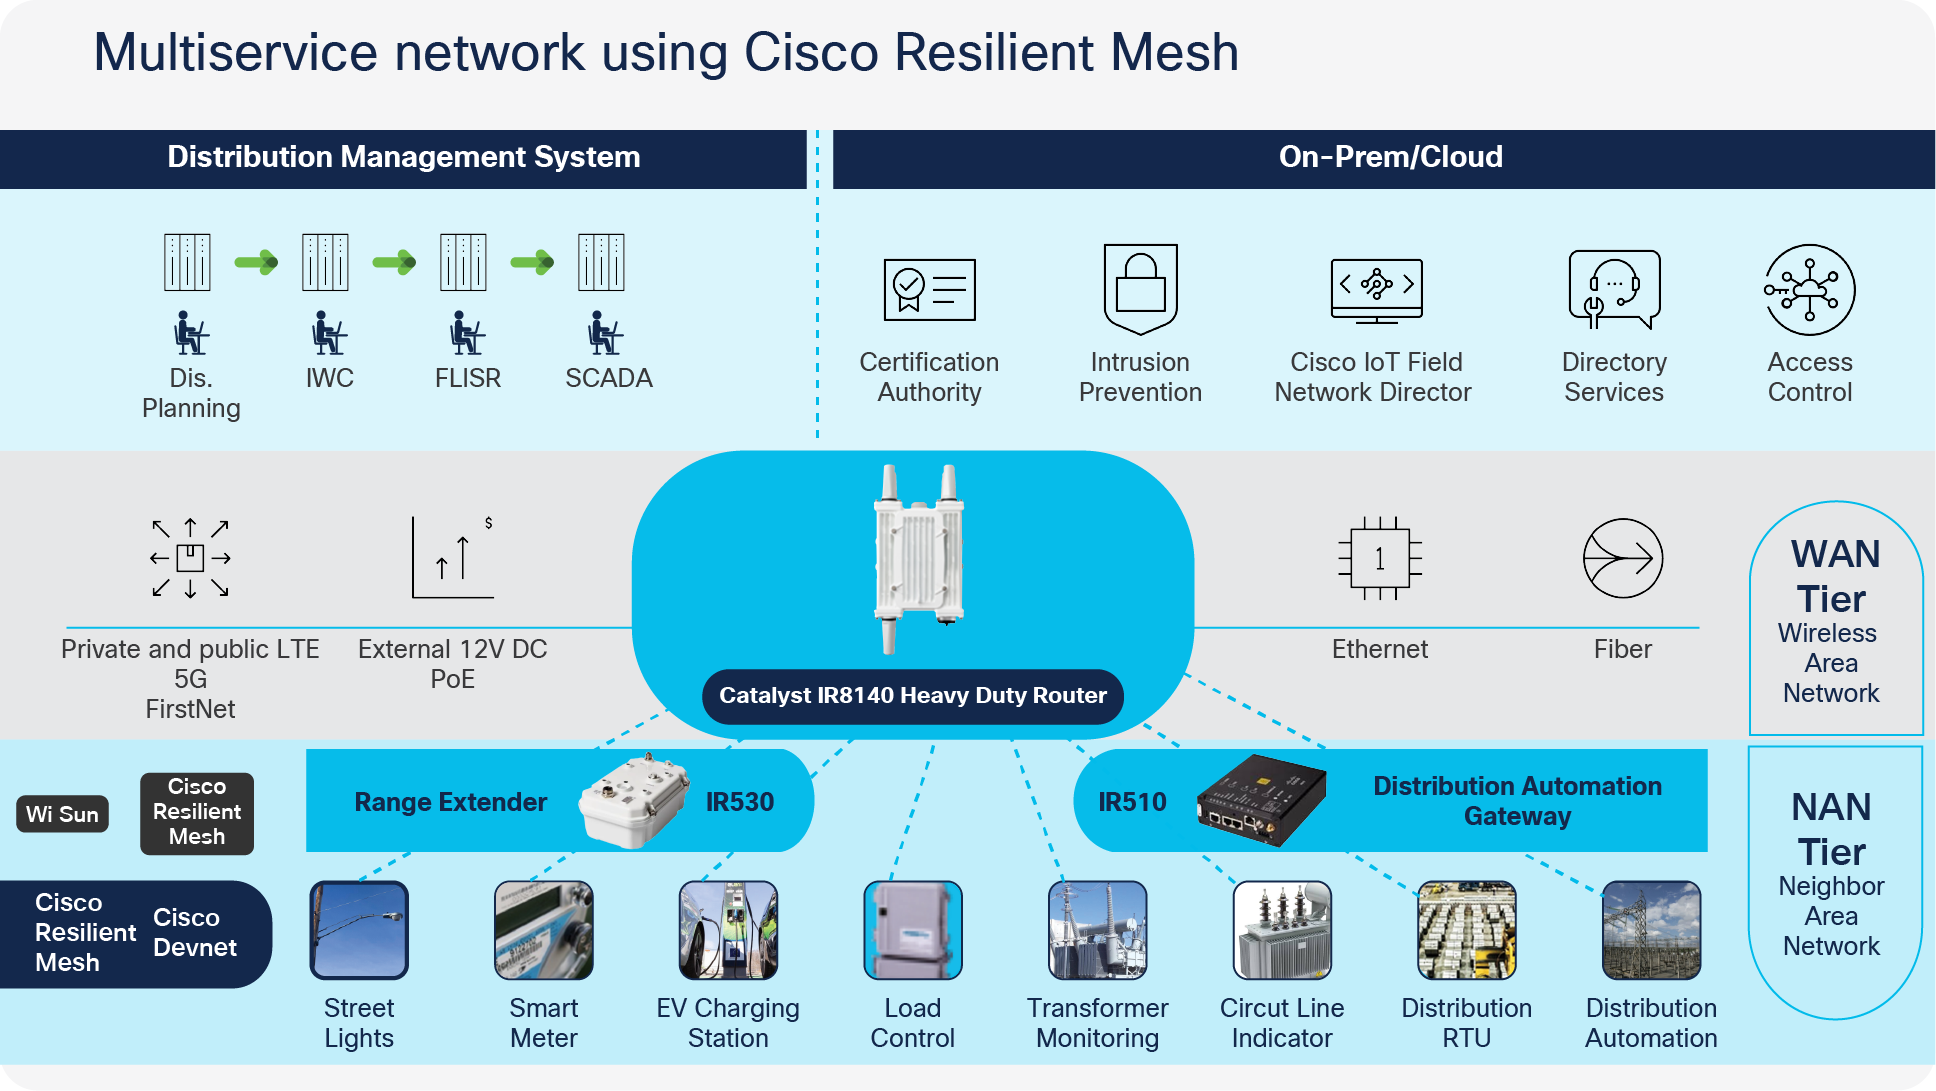 Multiservice network using Cisco Resilient Mesh